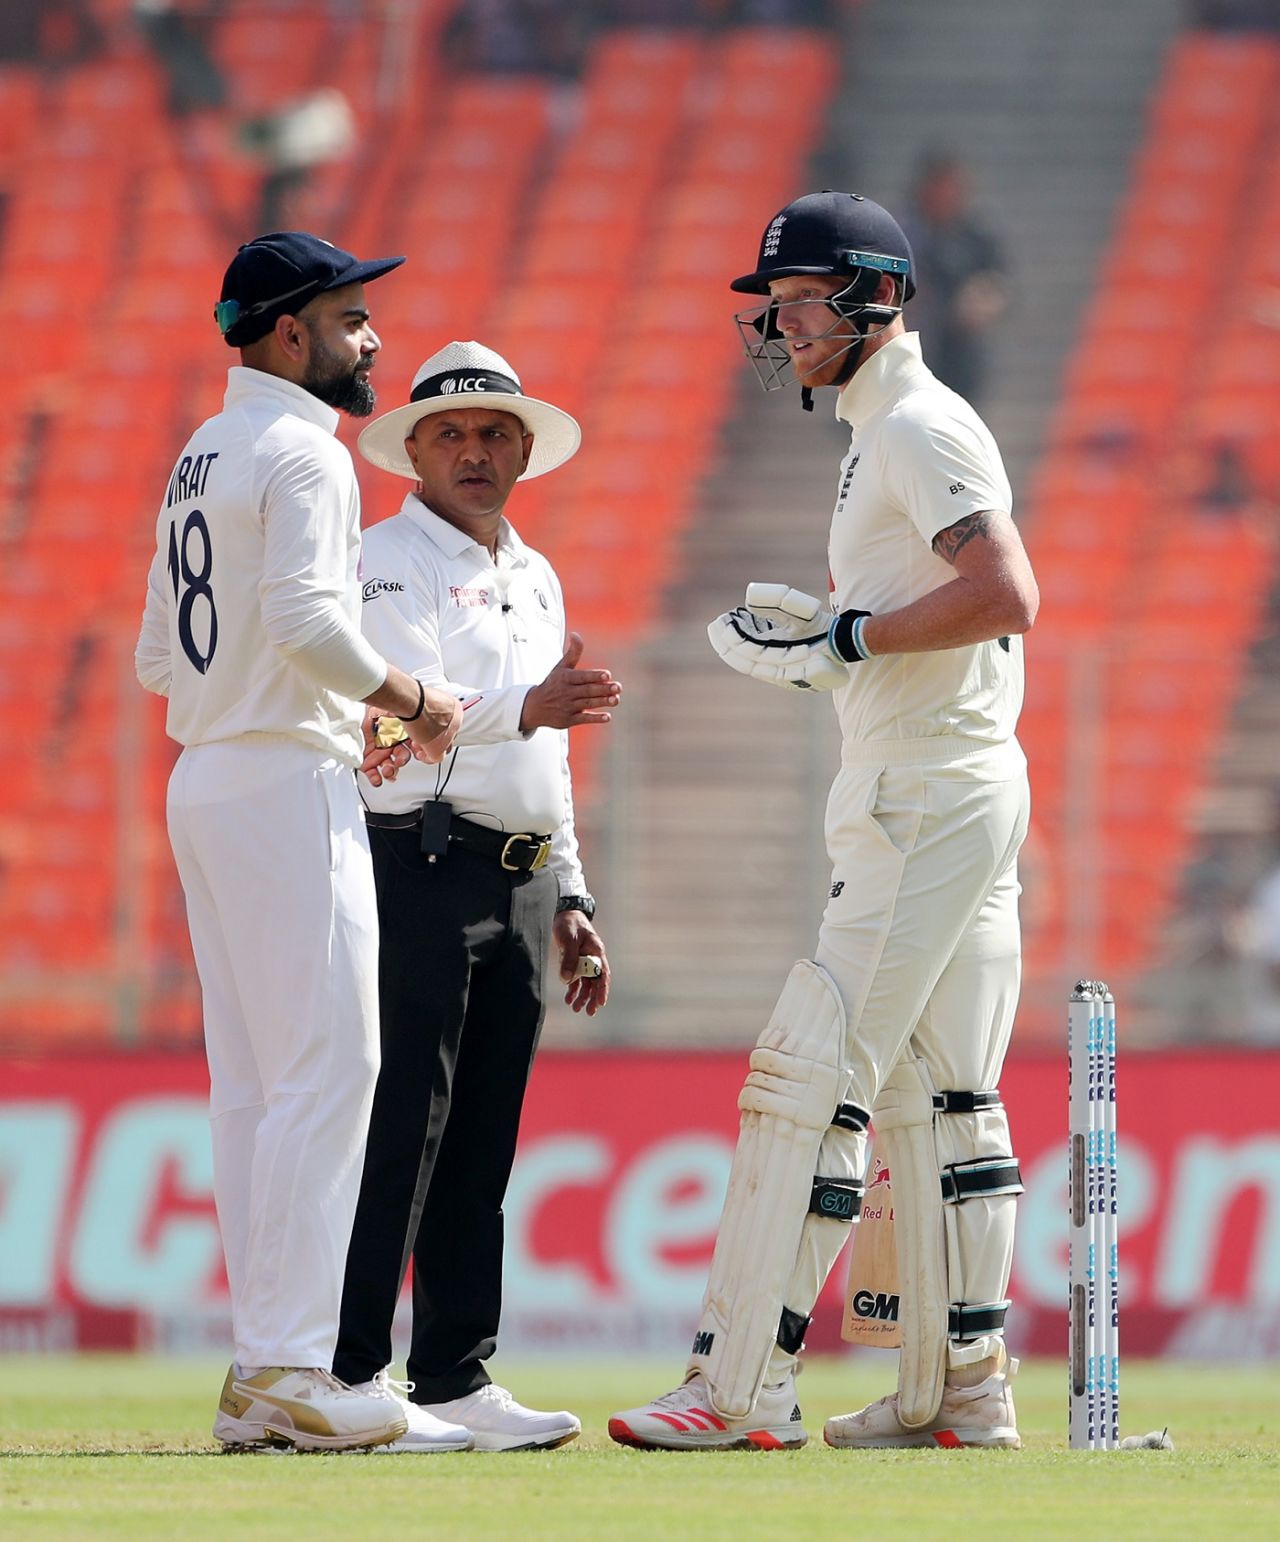 Virat Kohli and Ben Stokes exchange words during a staredown, while umpire Virender Sharma tries to keep the peace, India vs England, 4th Test, Ahmedabad, 1st Day, March 4, 2021